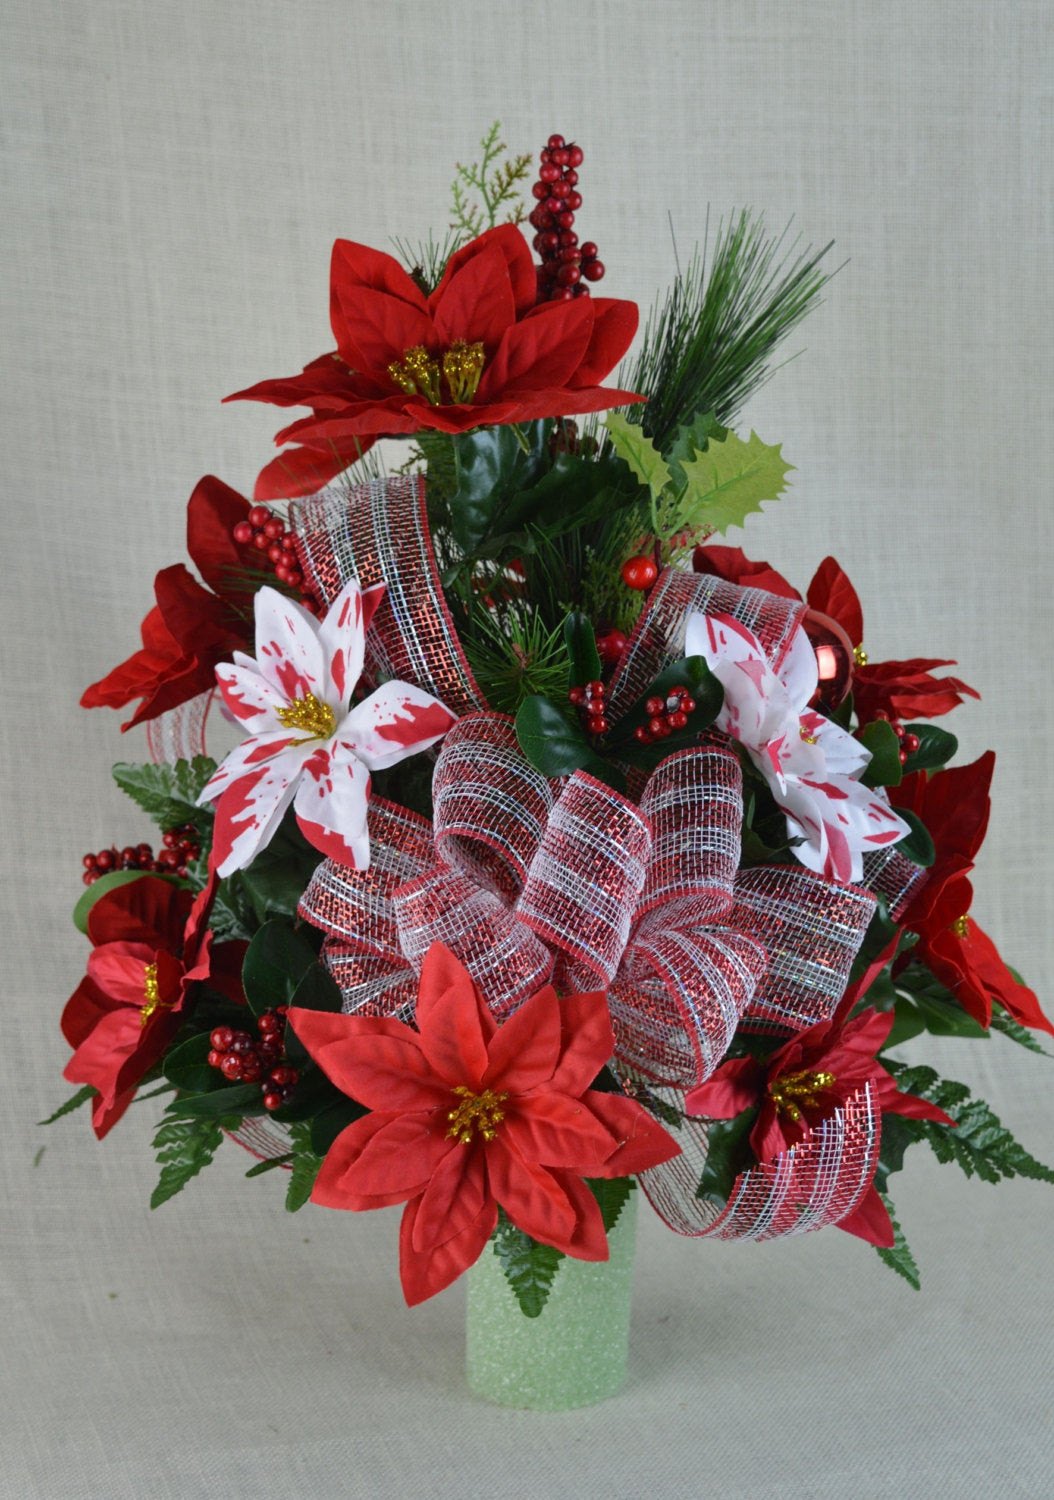 Christmas Artificial Flower Arrangements
 NO CC005 Holiday Christmas Silk Flower Cemetery by